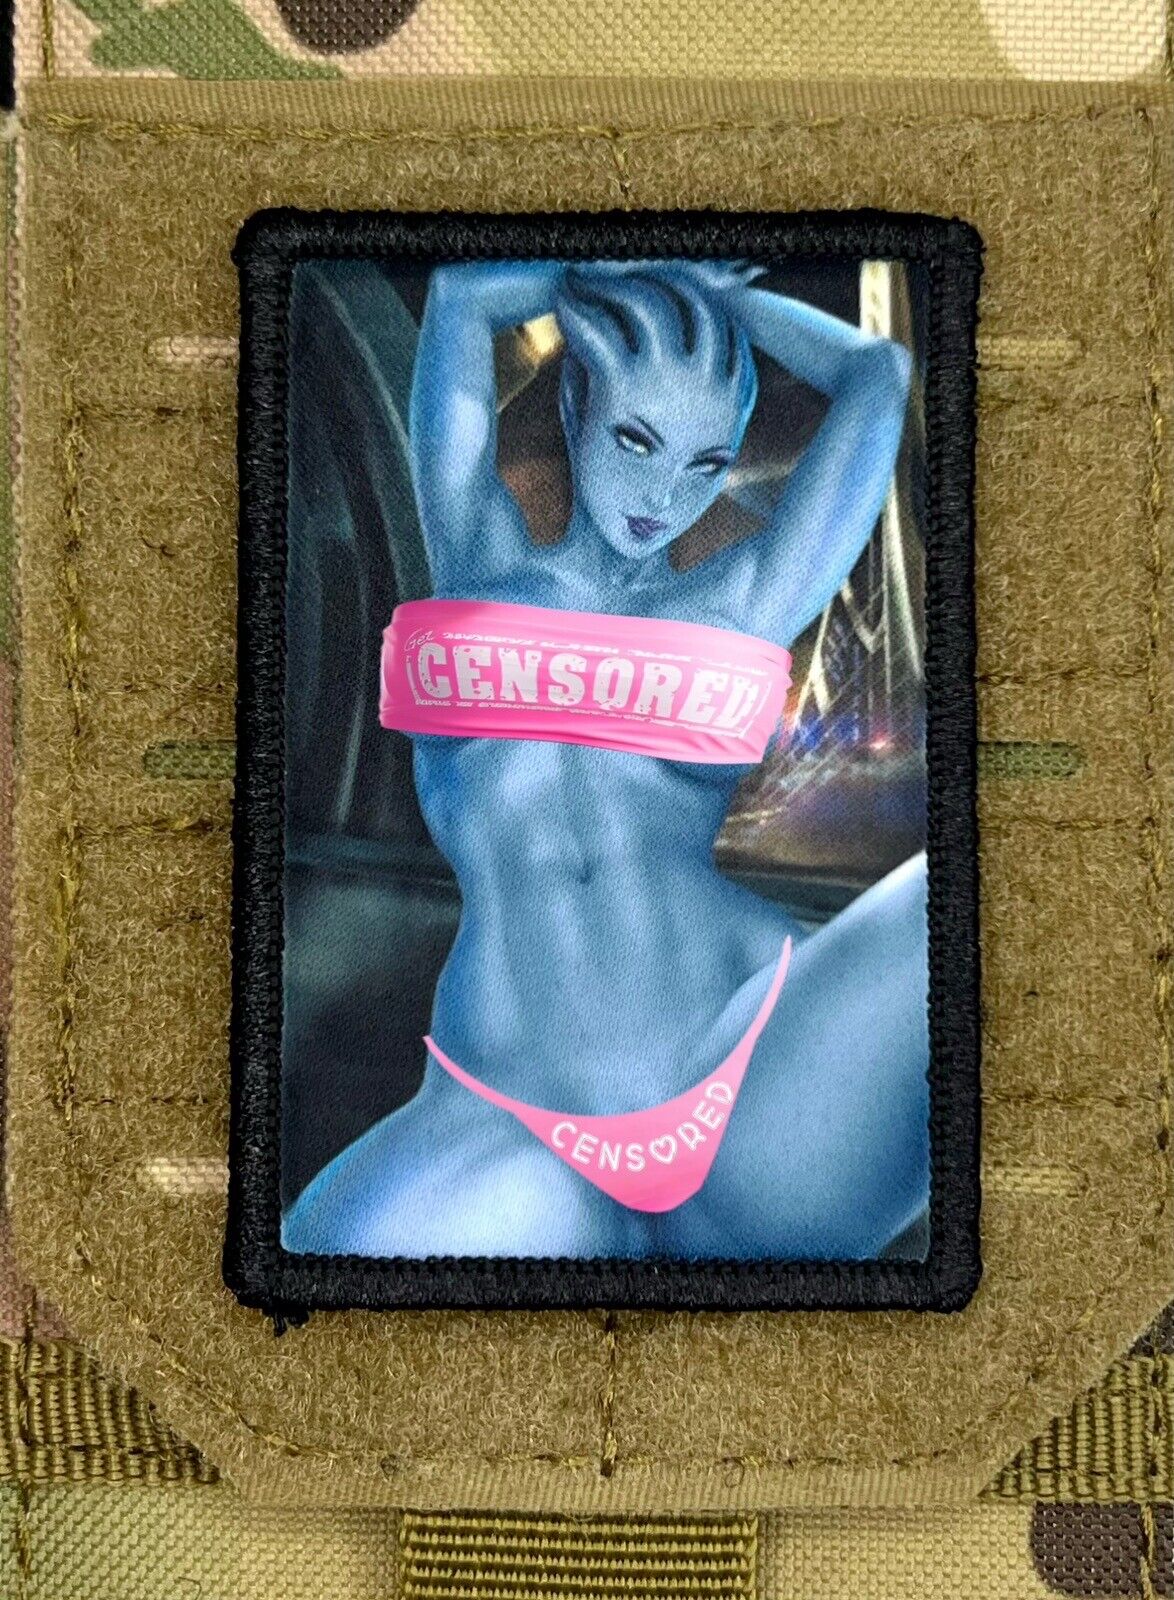 Mass Effect Liara T'Soni Uncensored Morale Patch / Military ARMY Airsoft 588